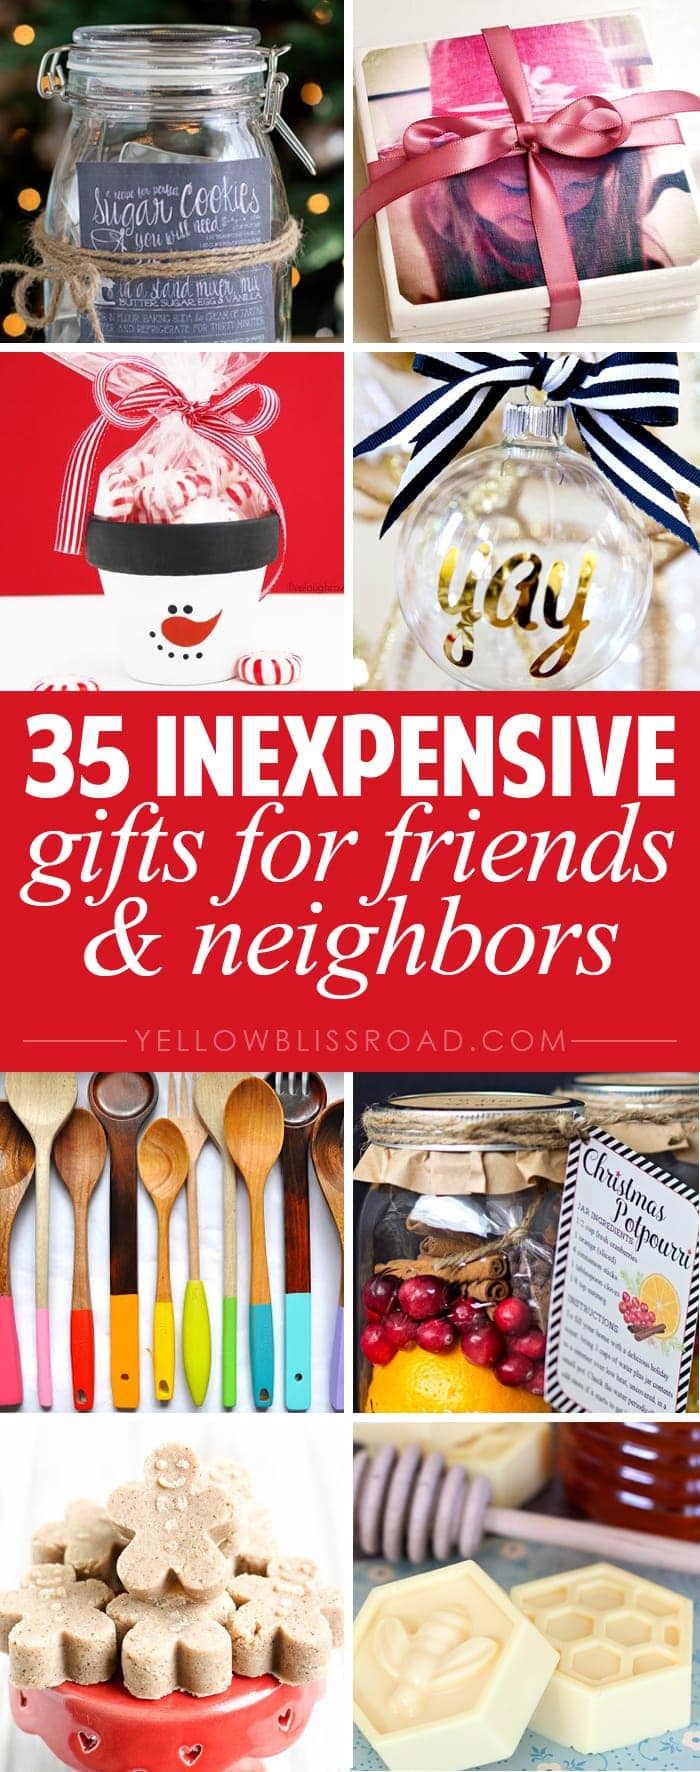 Budget Gifts Ideas for Friends and Neighbors (Homemade Christmas Gifts)